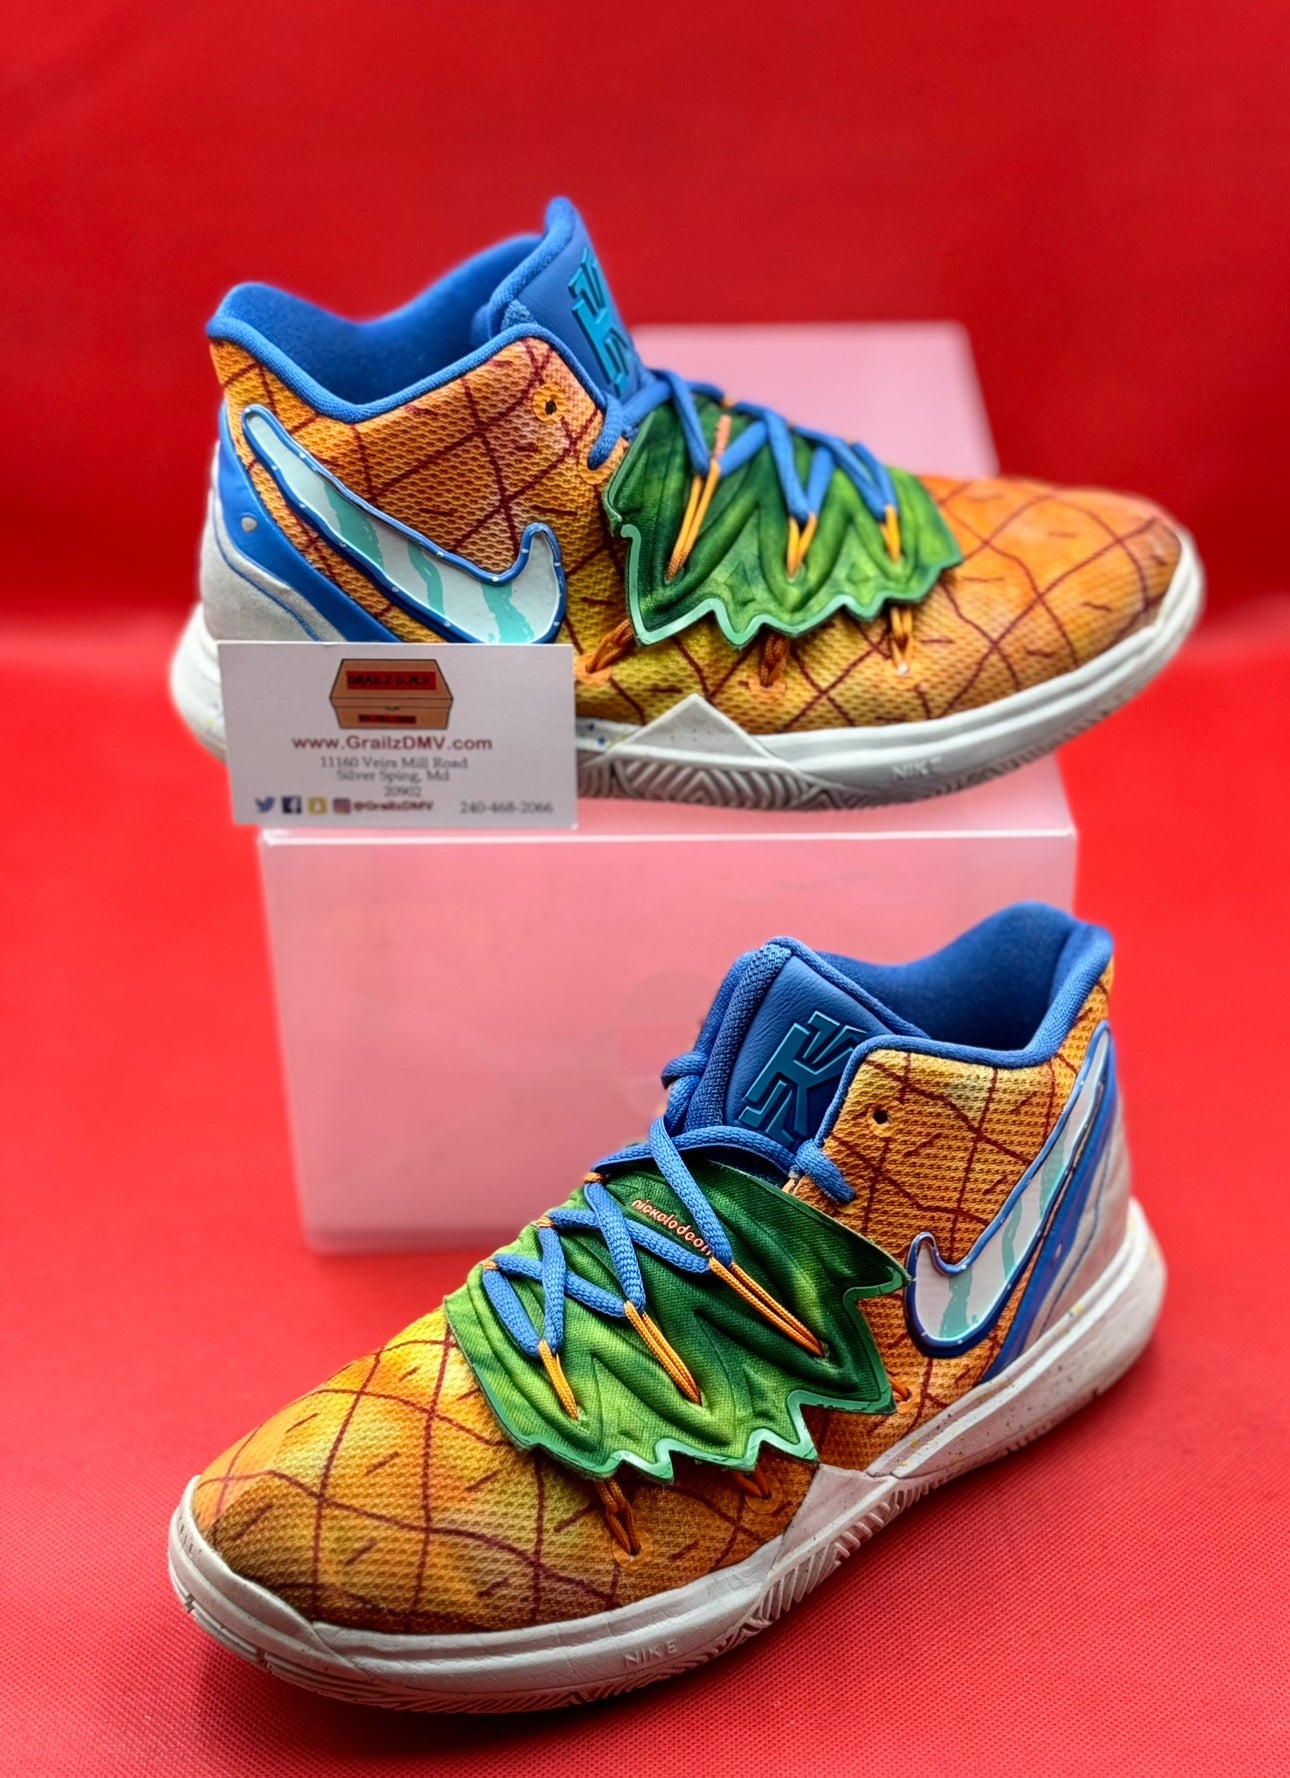 Kyrie 5 Pineapple House Size 7Y